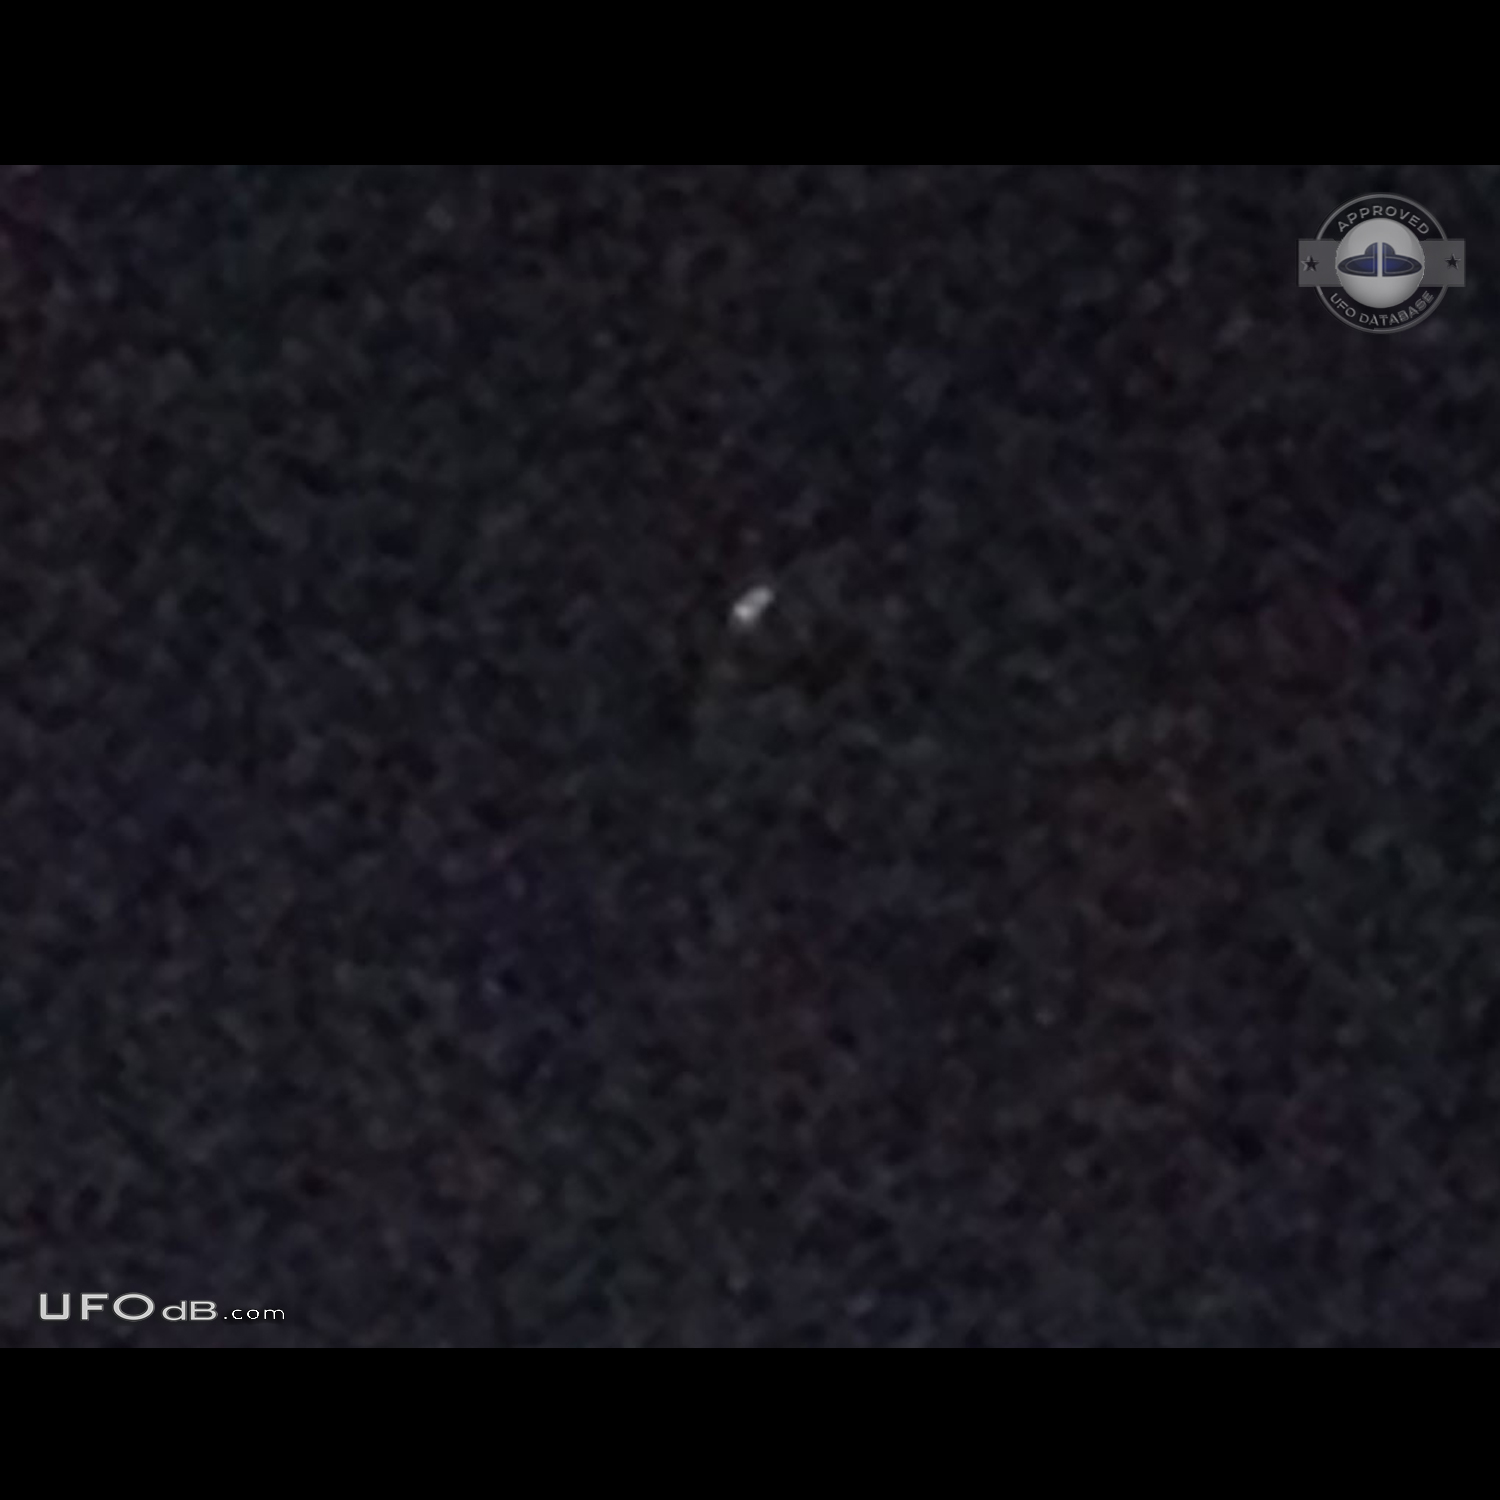 UFO first seen on 16 then seen again 17 oct 2015 - Providence Village  UFO Picture #733-4